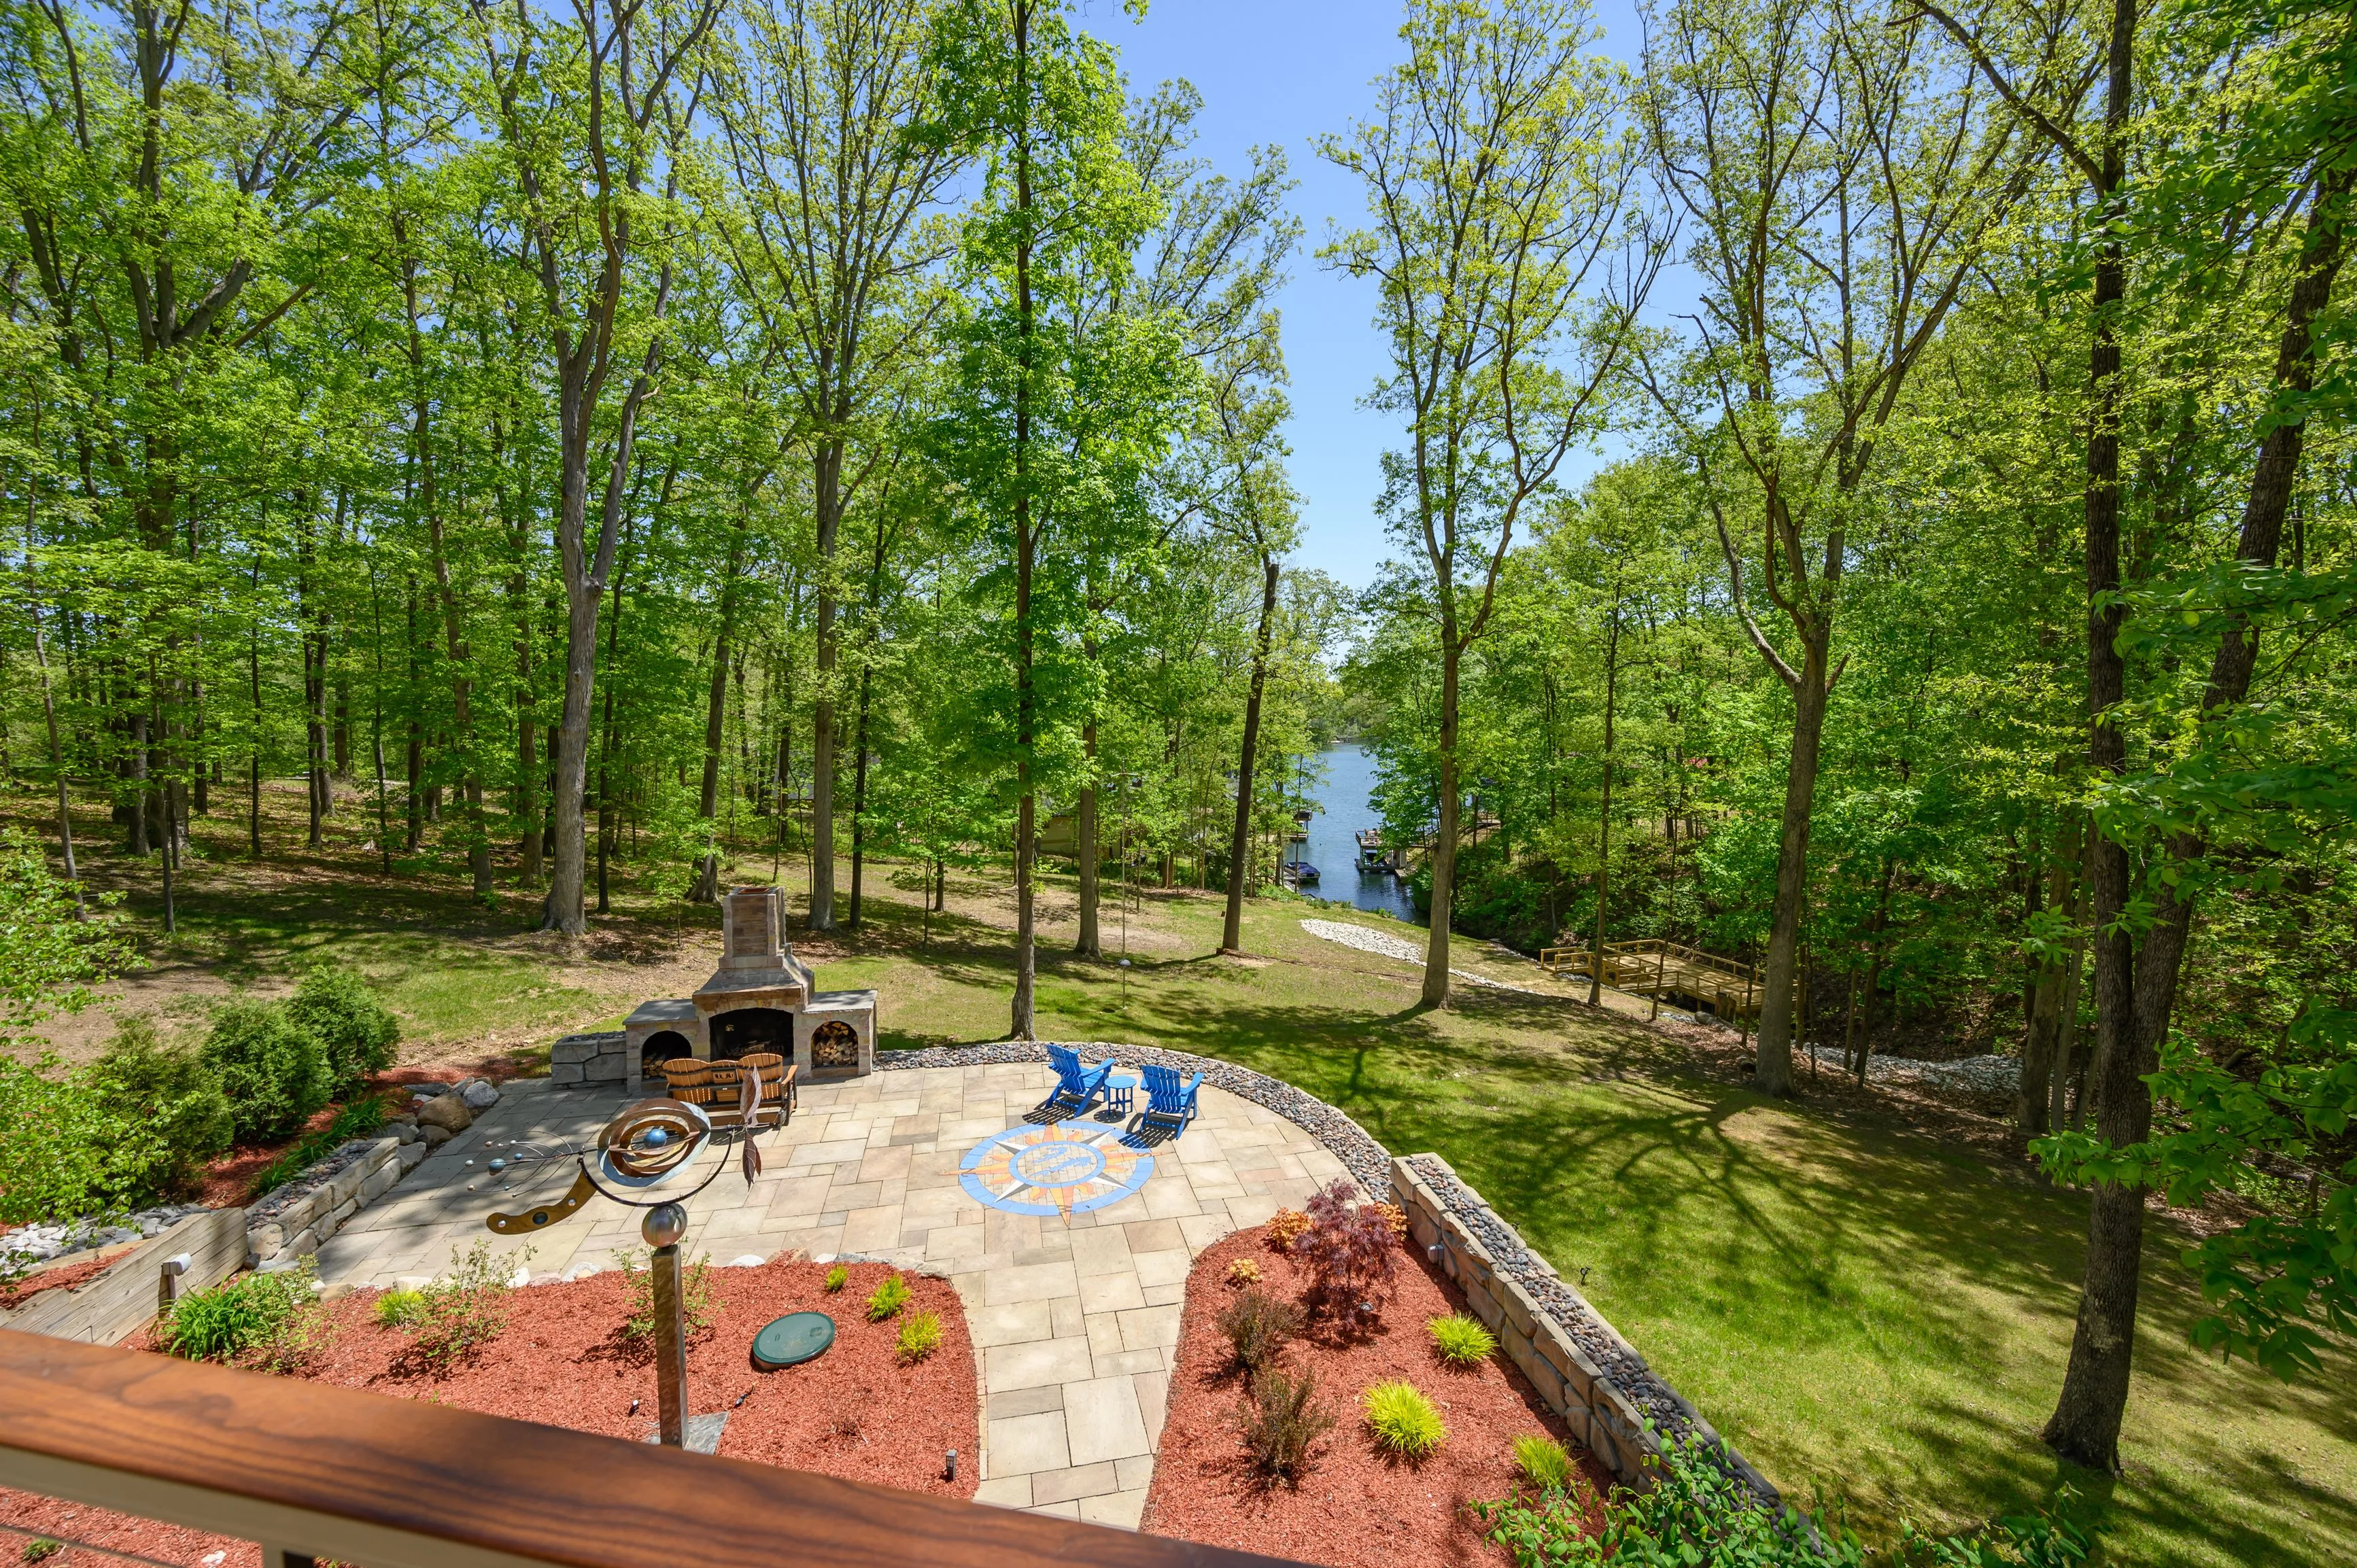 Backyard patio with a fire pit and seating area surrounded by lush green forest and a view of a lake in the distance.